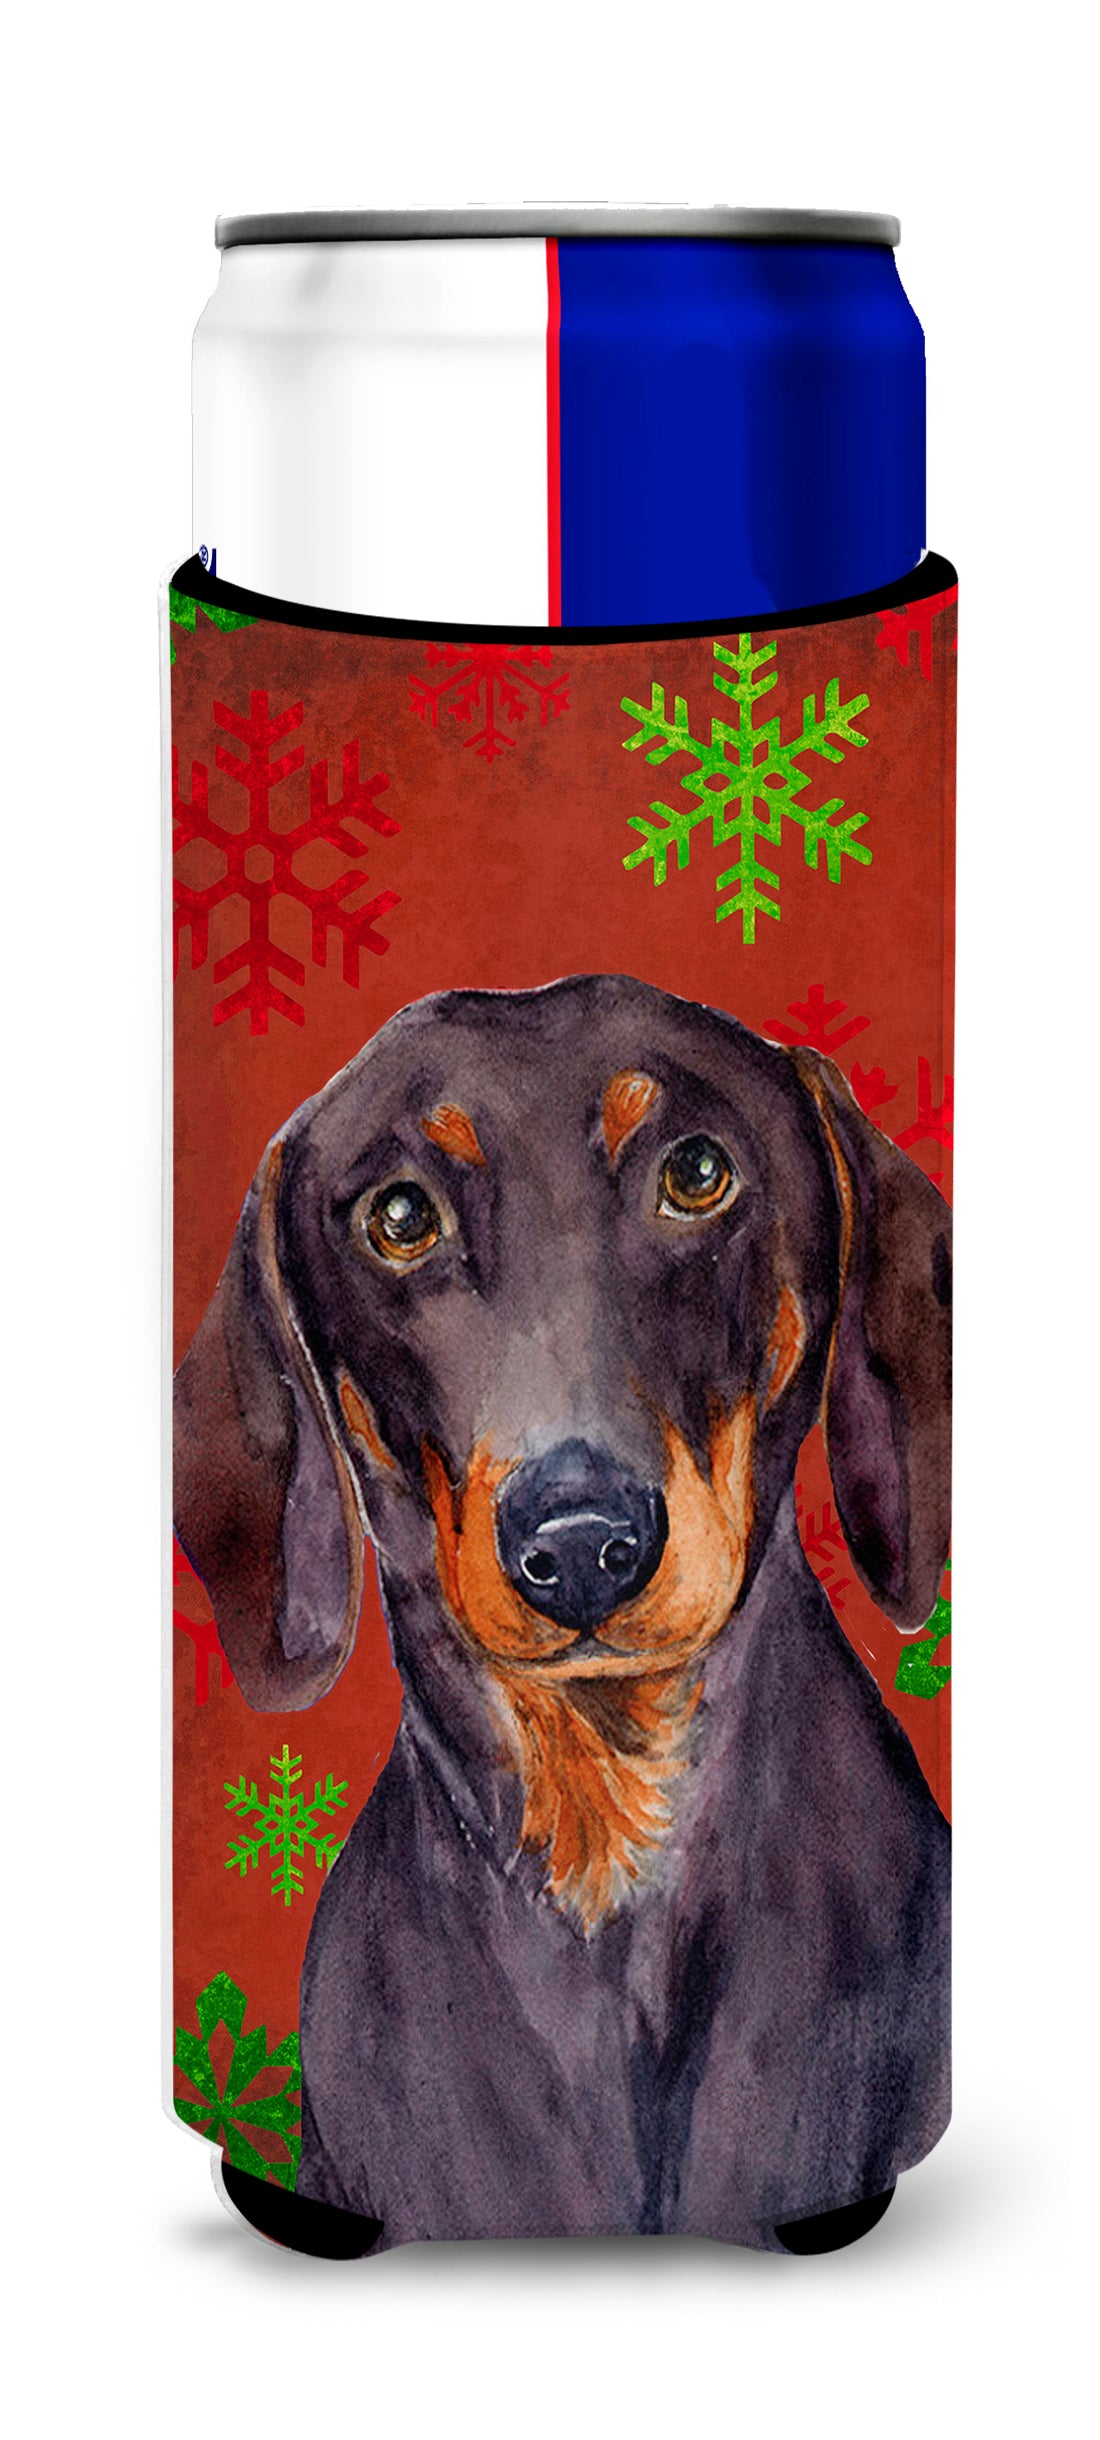 Dachshund Red and Green Snowflakes Holiday Christmas Ultra Beverage Insulators for slim cans LH9313MUK.